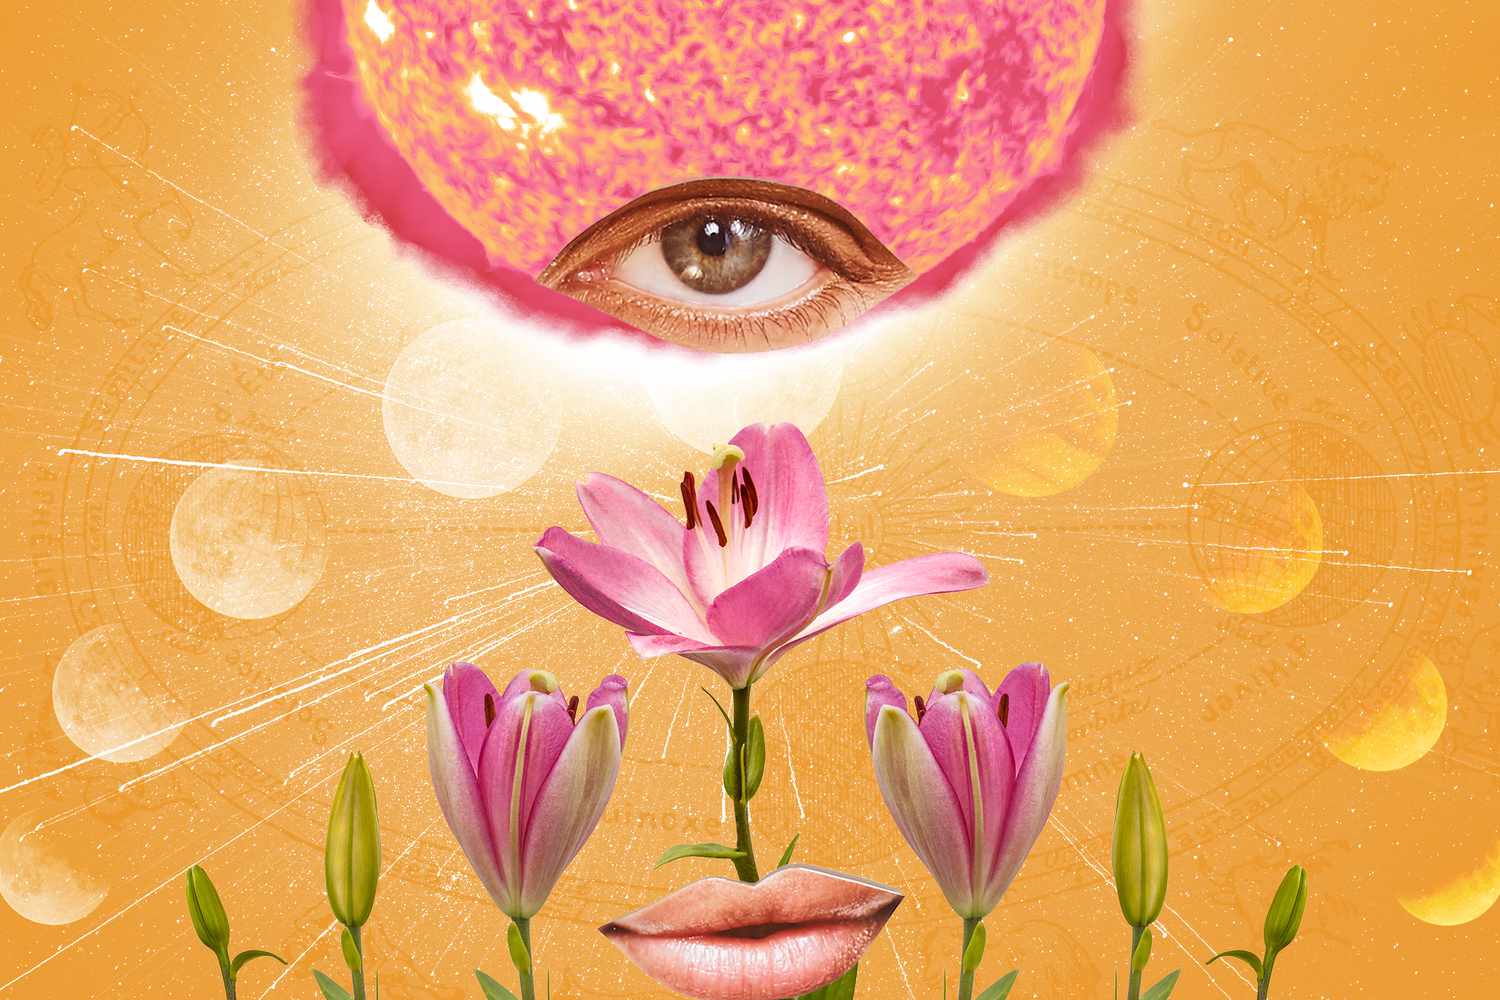 The sequence of blooming flower pink lily stars background and sun with eye